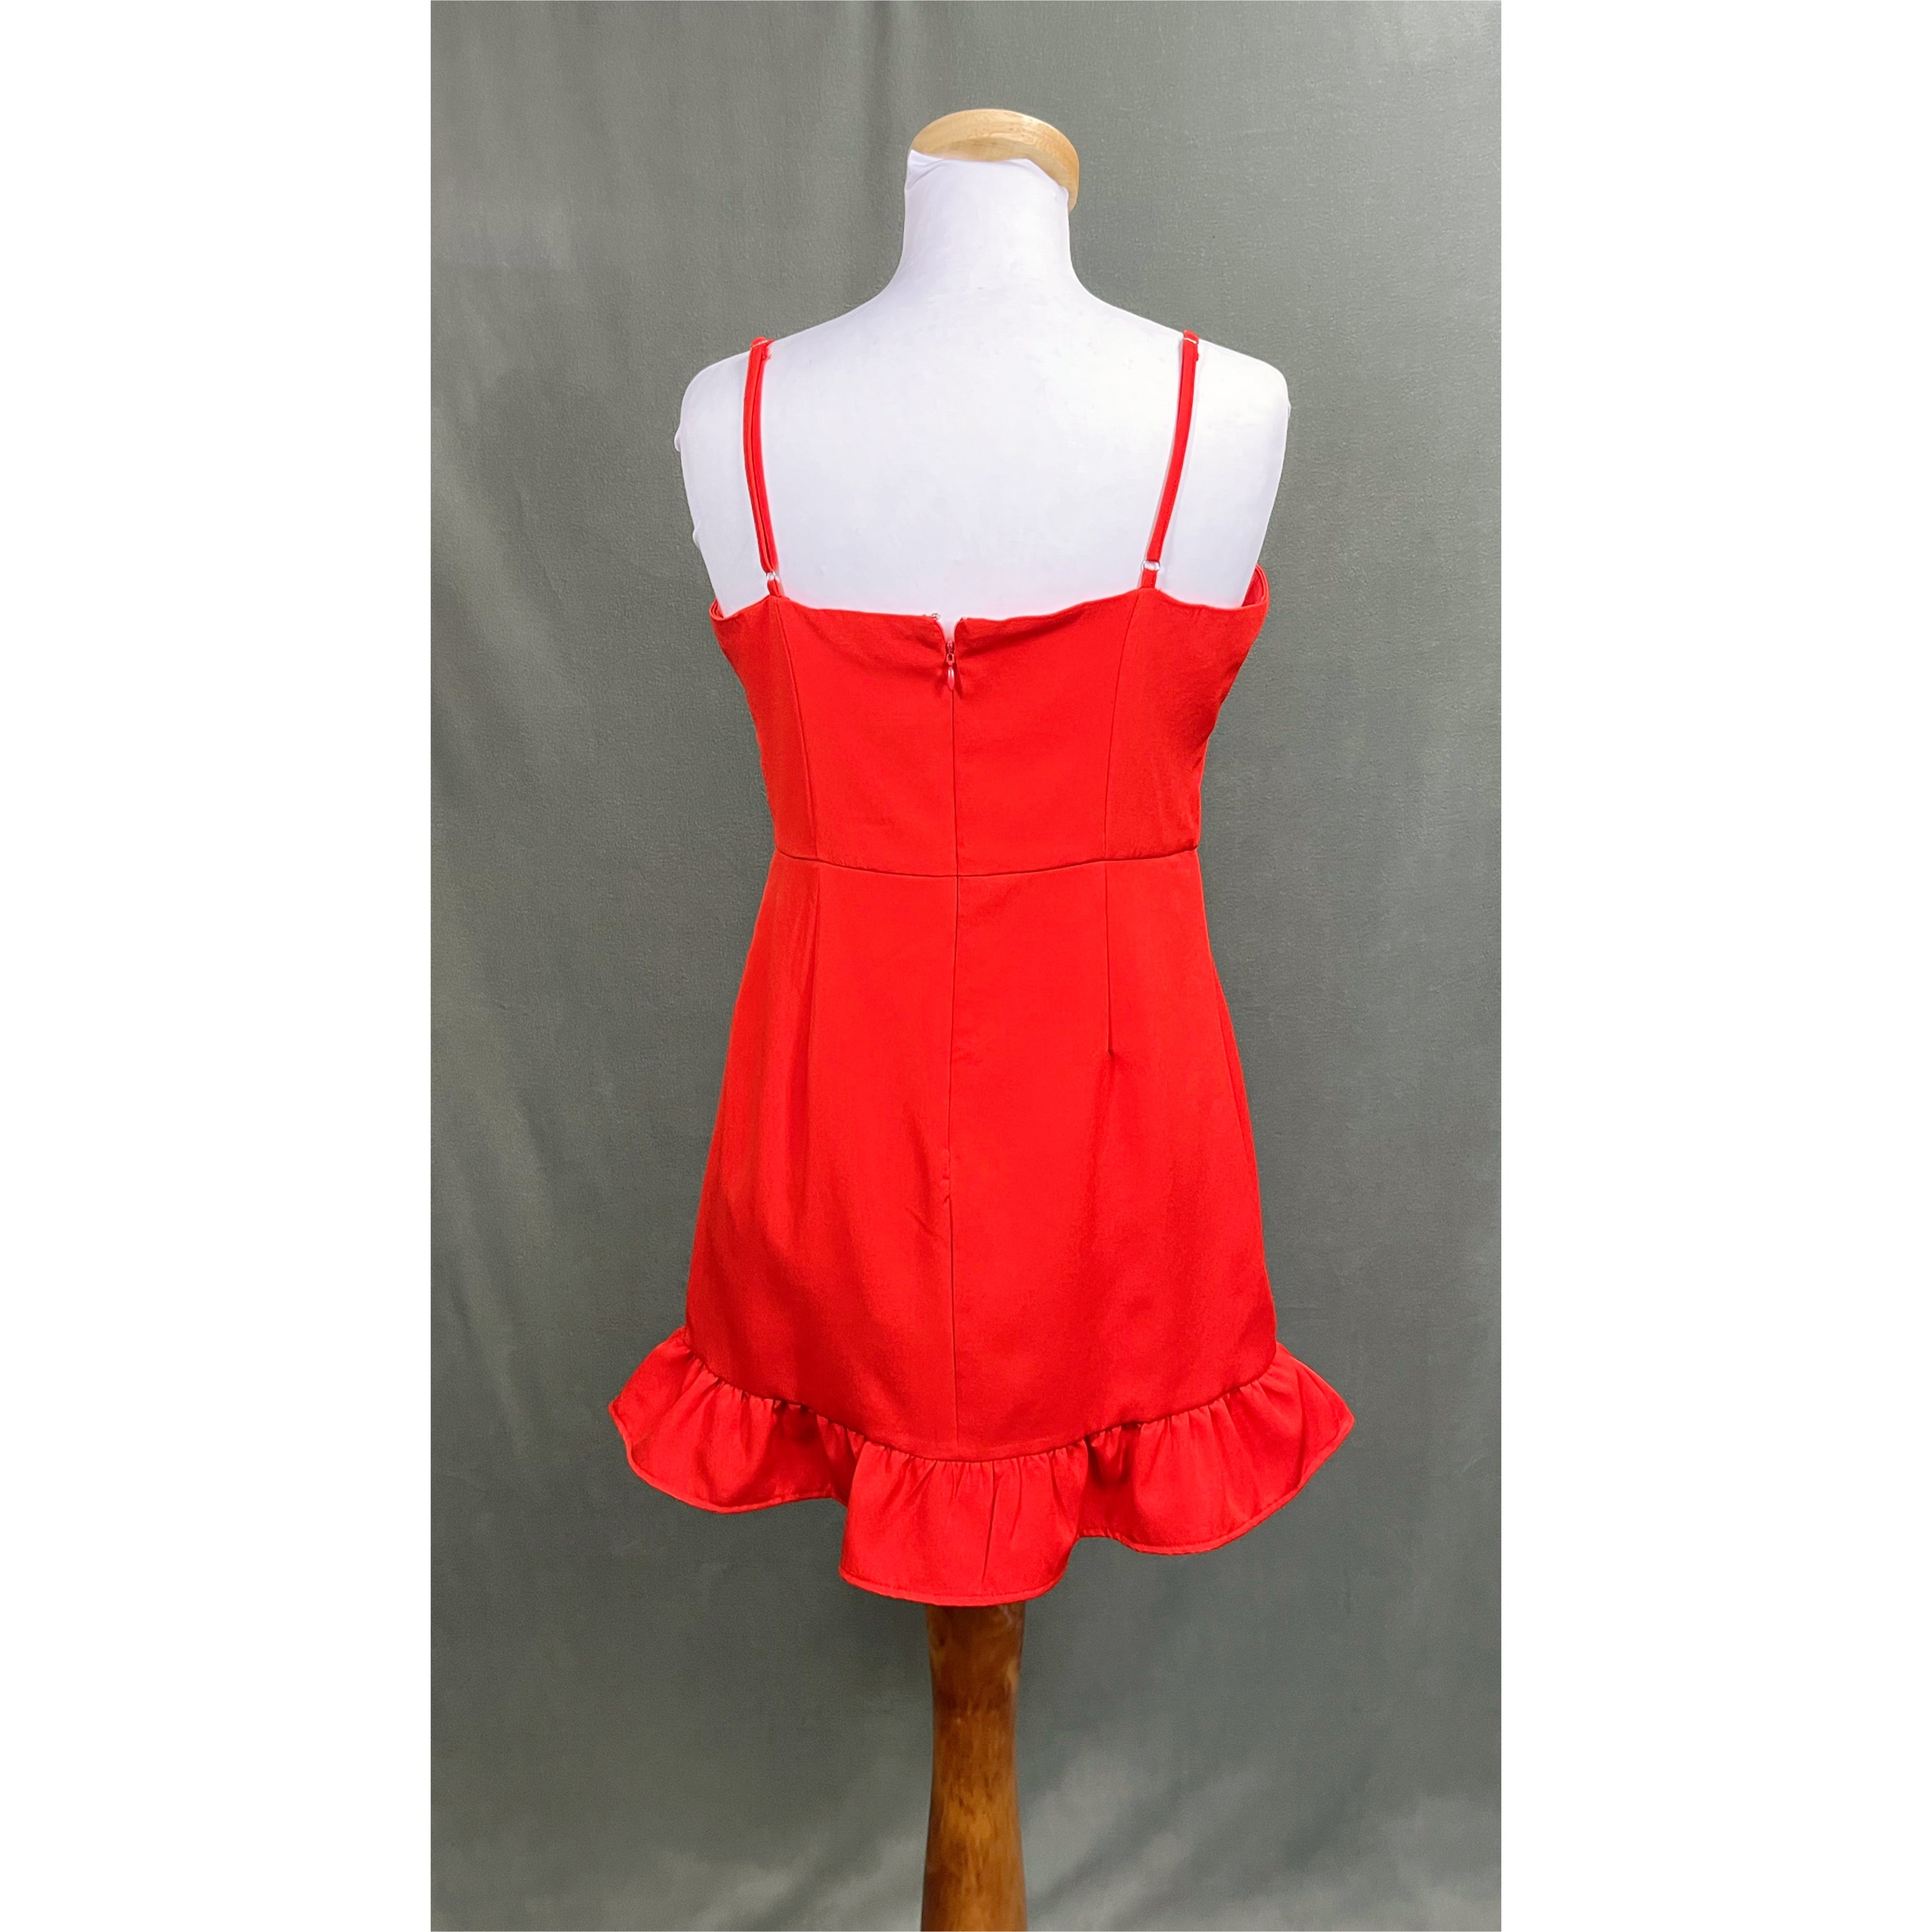 TCEC red dress, sizes M & L, NEW WITH TAGS!